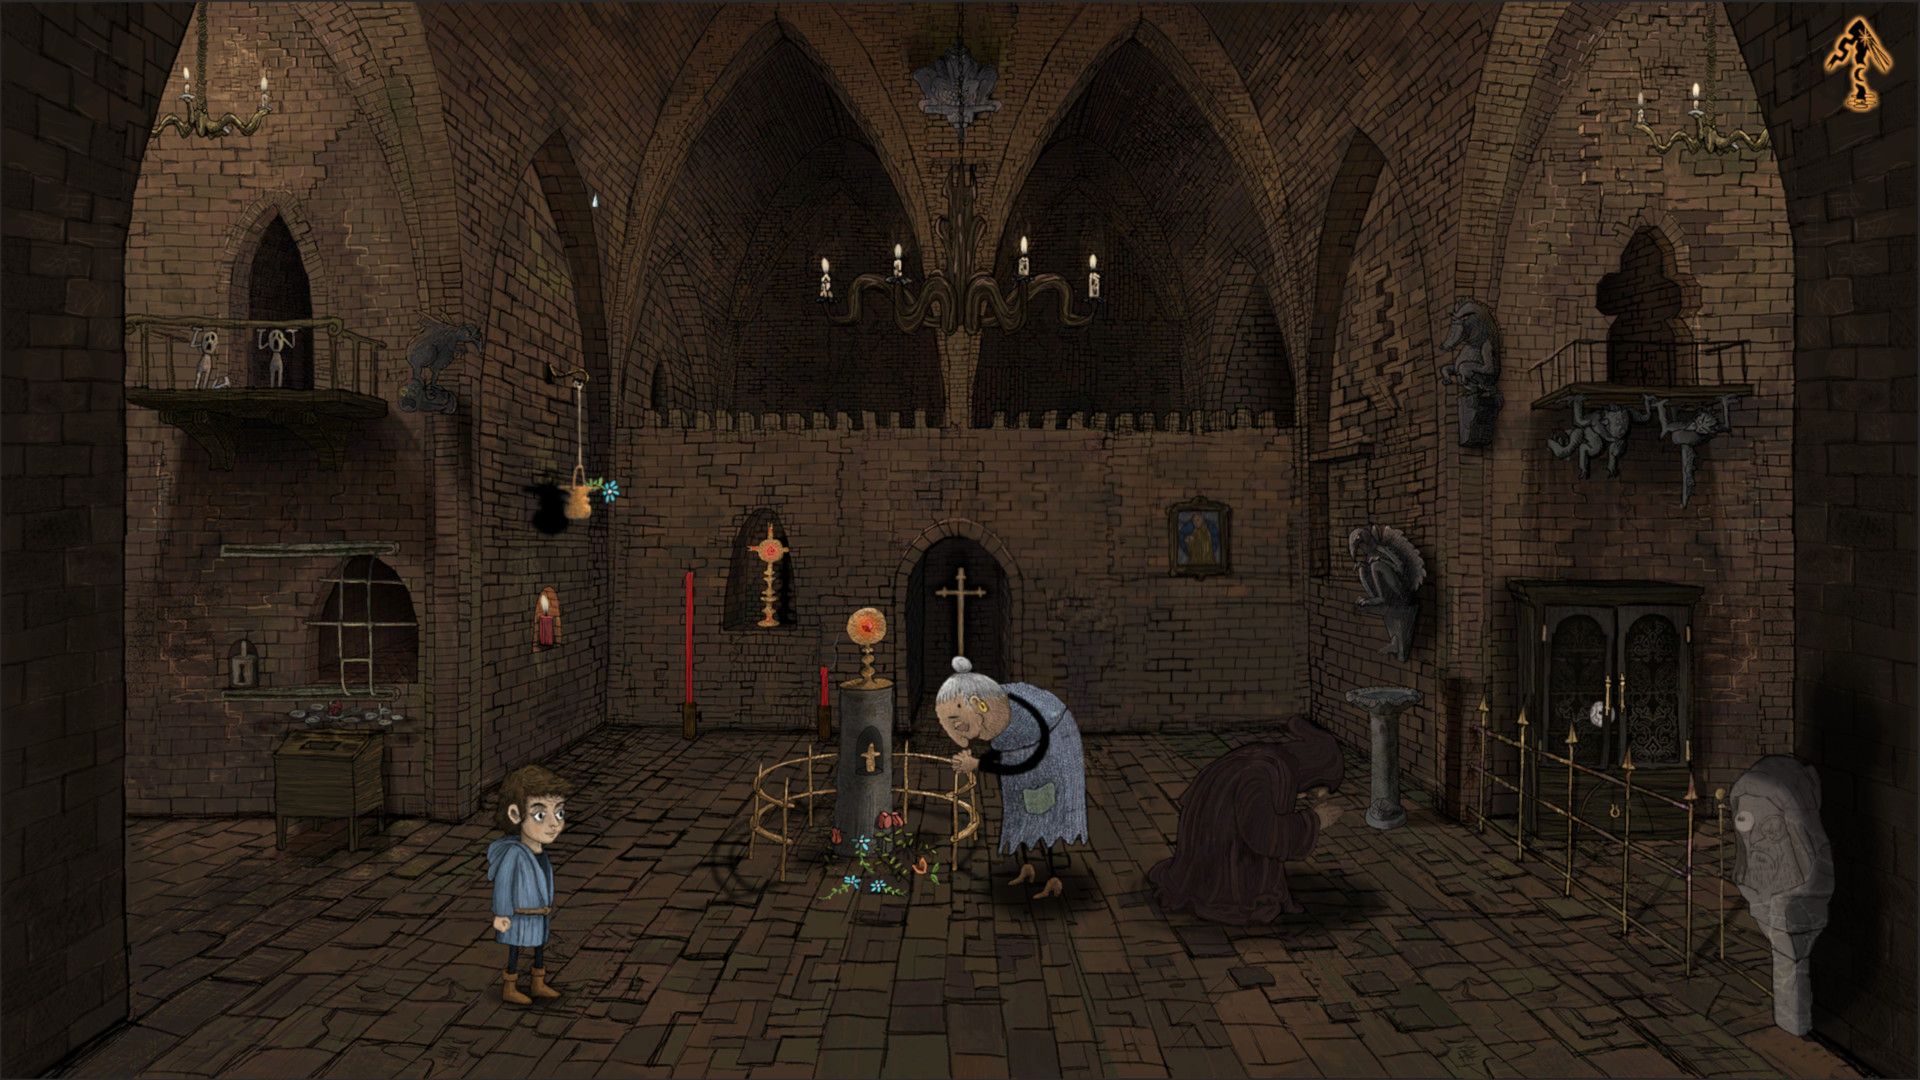 Old-School Point And Click Adventure Games That Still Hold Up Today